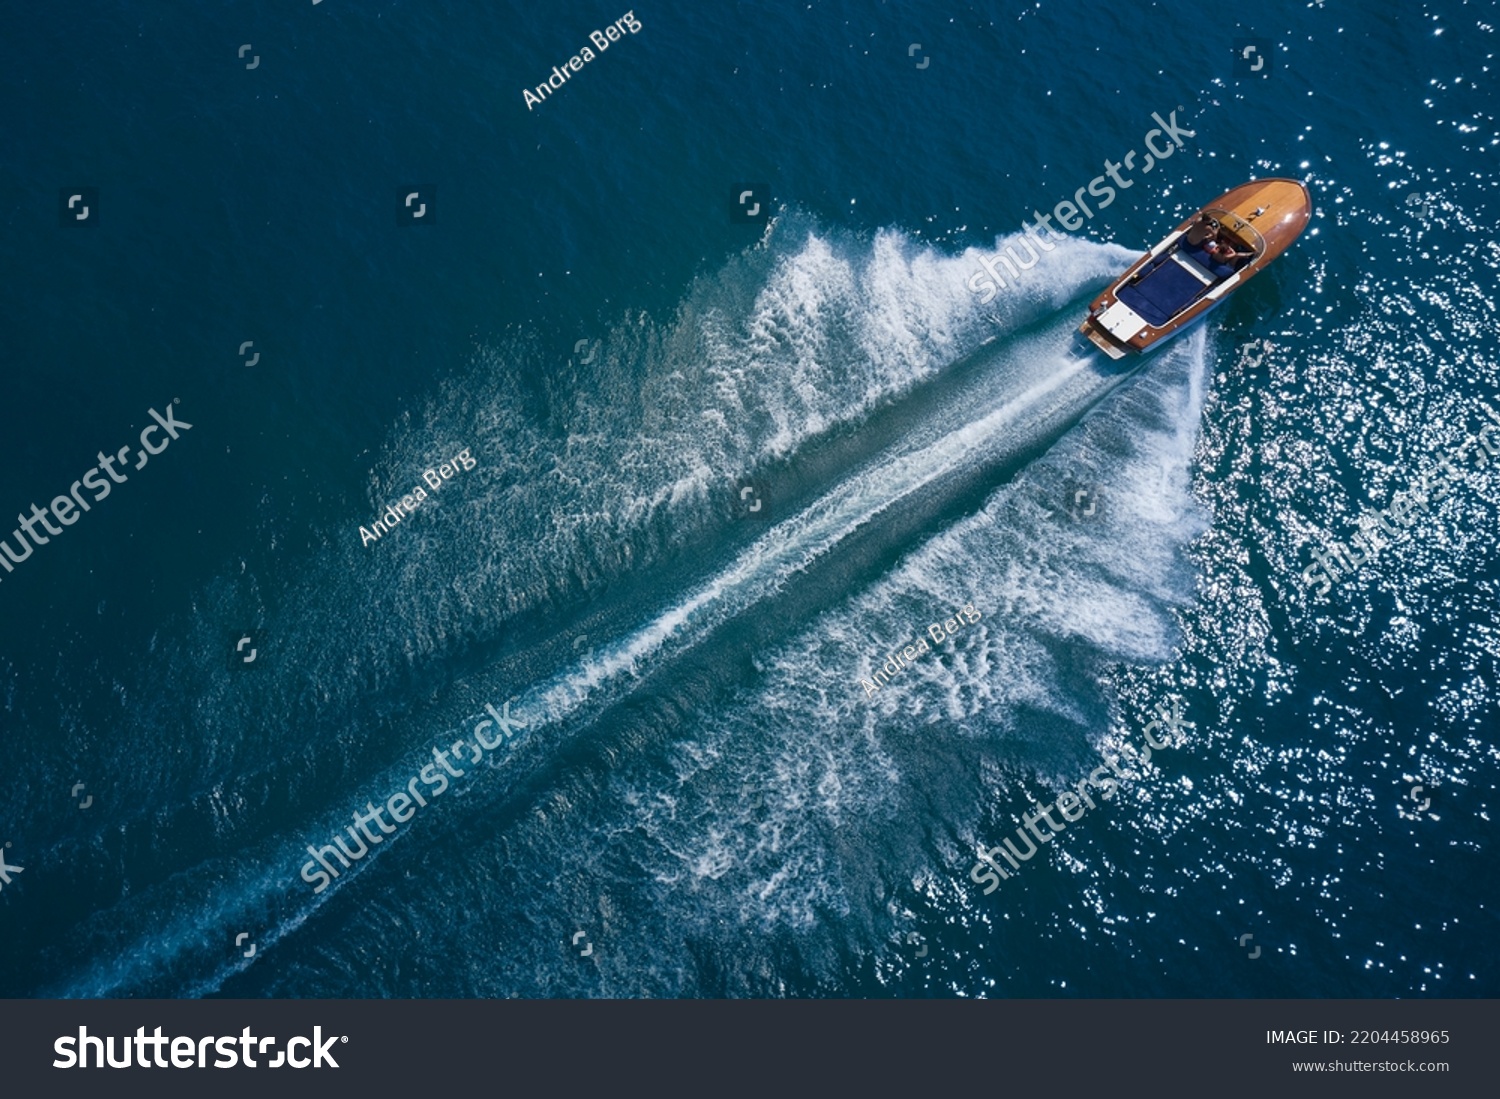 Luxurious wooden boat fast movement on dark water. Luxurious wooden motor boat rushes through the waves of the blue Sea. Classic Italian wooden boat fast moving aerial view. #2204458965